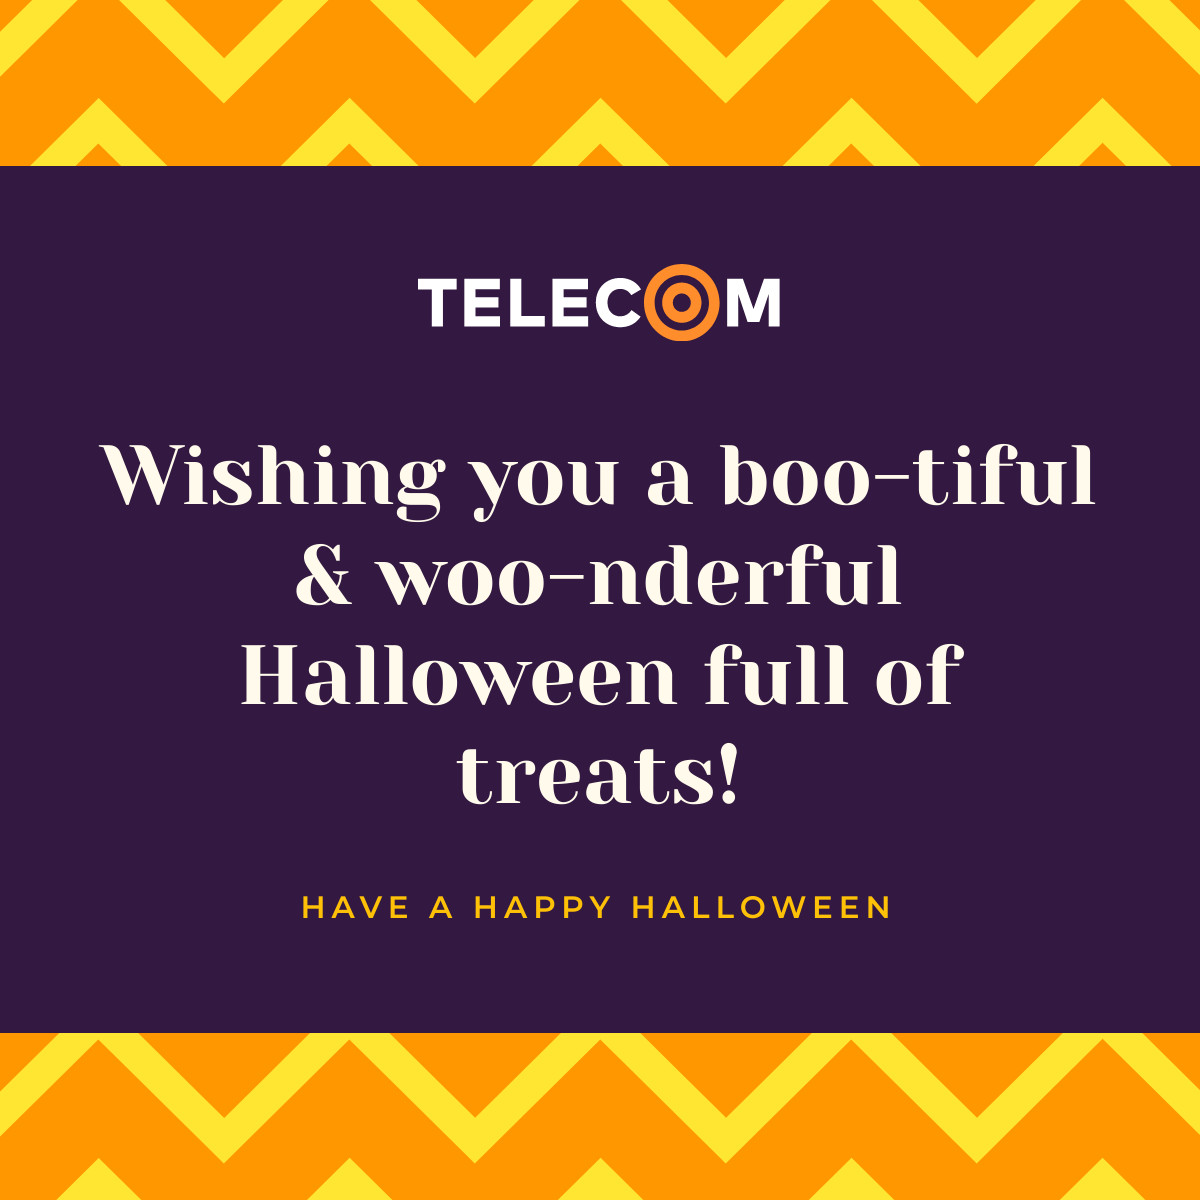 Telecom Bootiful and Woonderful Halloween Responsive Square Art 1200x1200